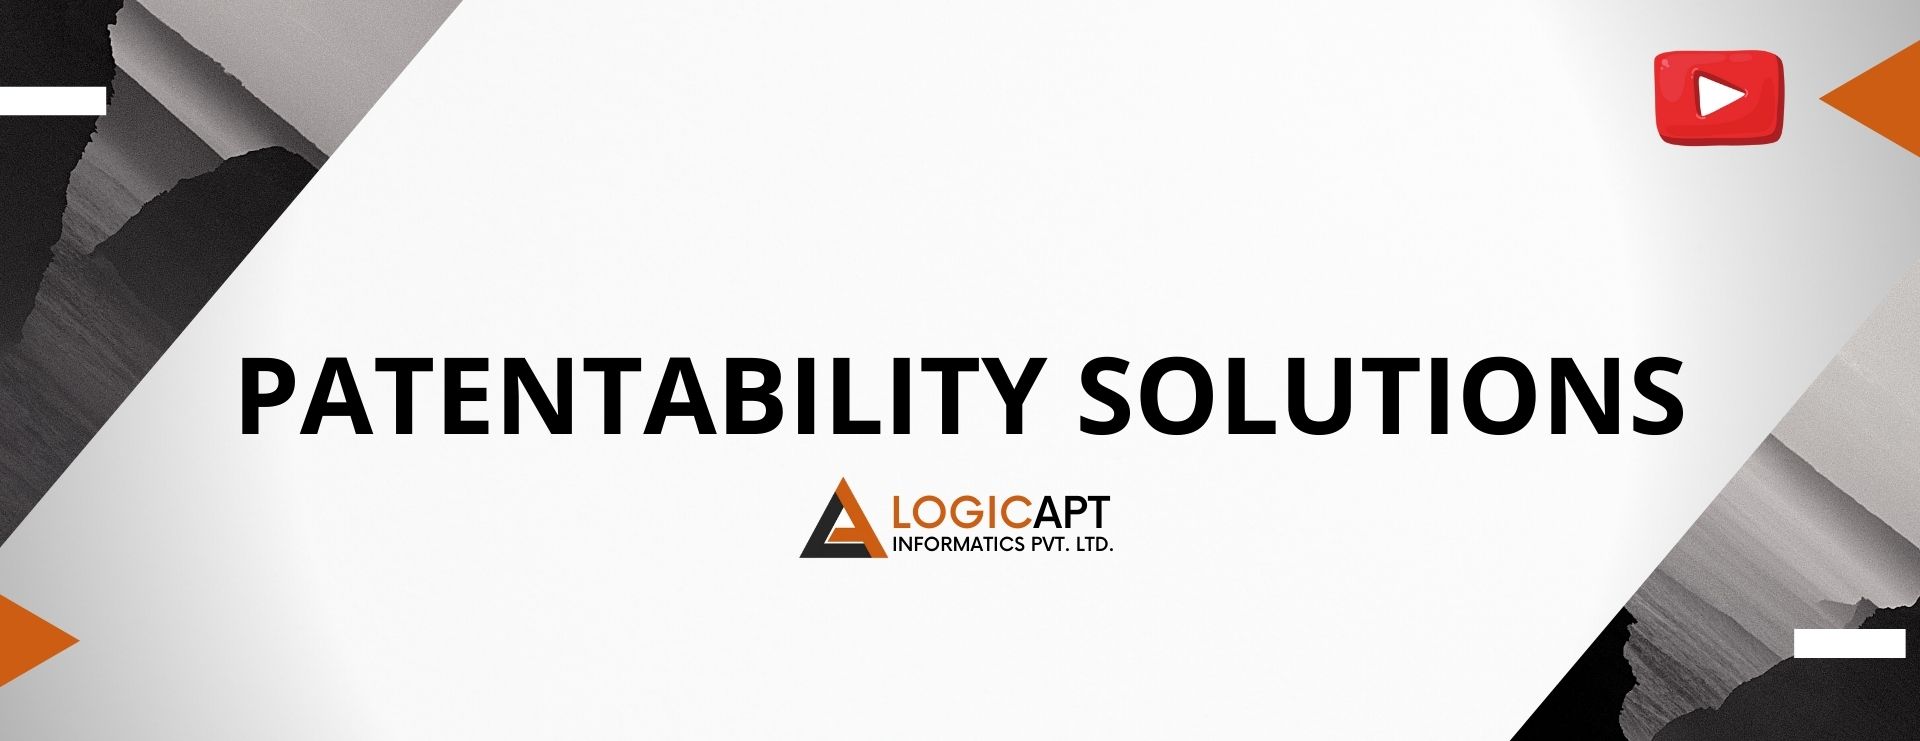 Patentability Solutions